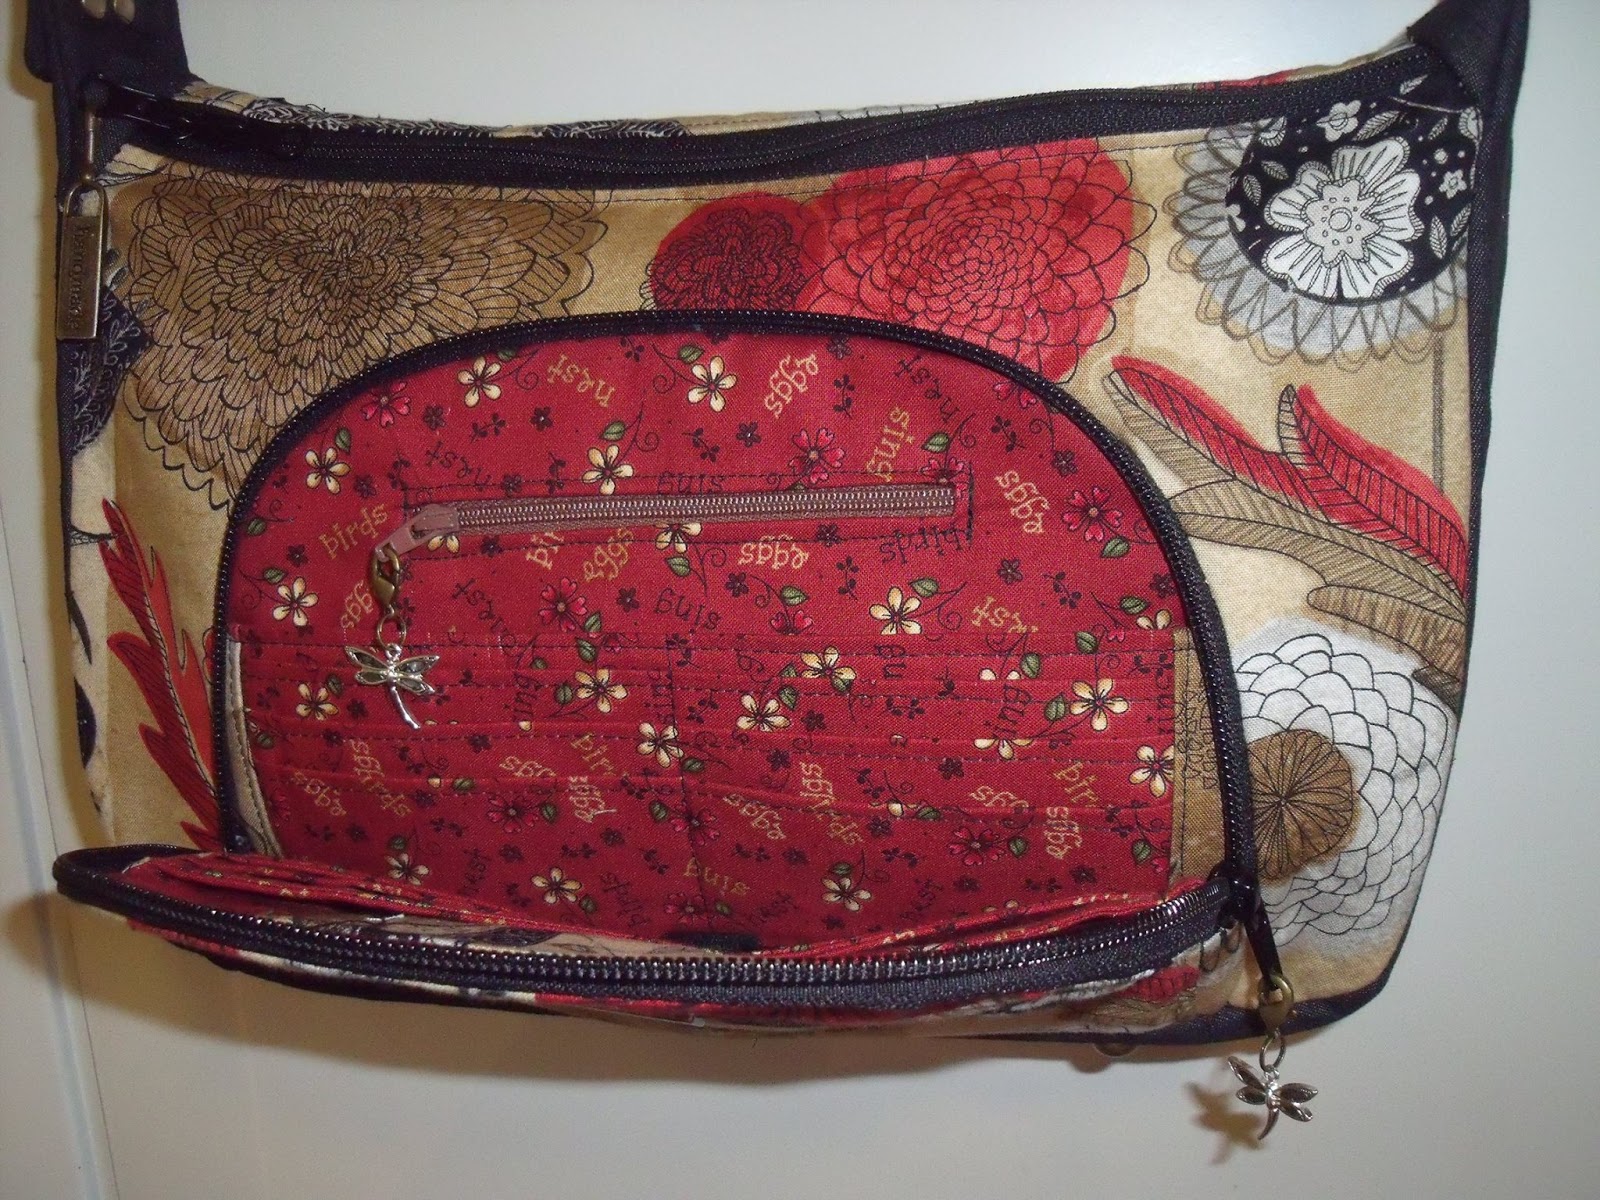 Emmaline Bags: Sewing Patterns and Purse Supplies: The Prairie Girl Bag ...